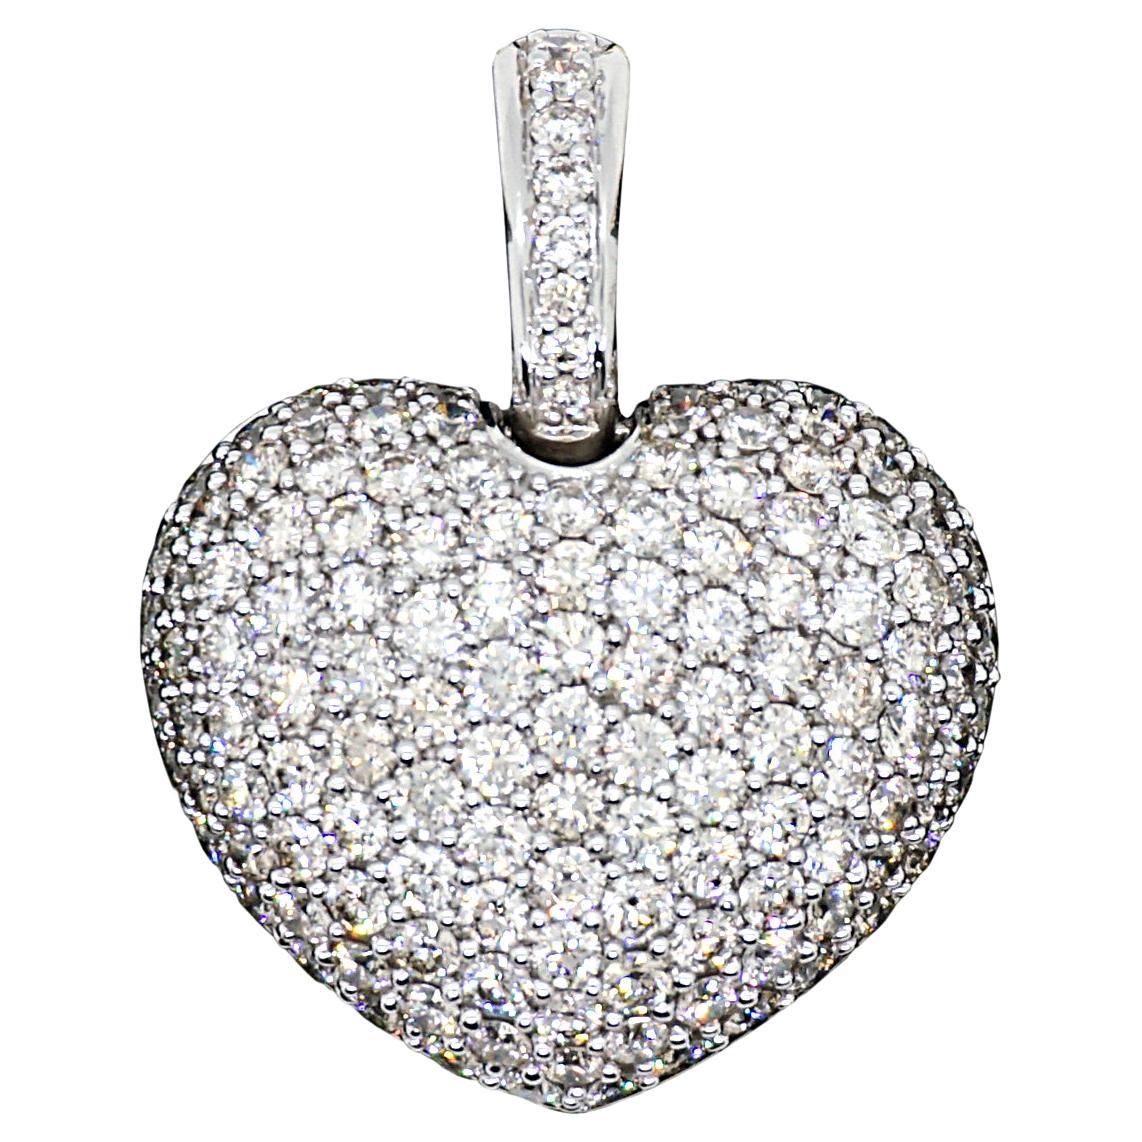 Heart-Shaped Pendant Clip With Numerous Diamonds 4.85 ct White Gold 18k For Sale